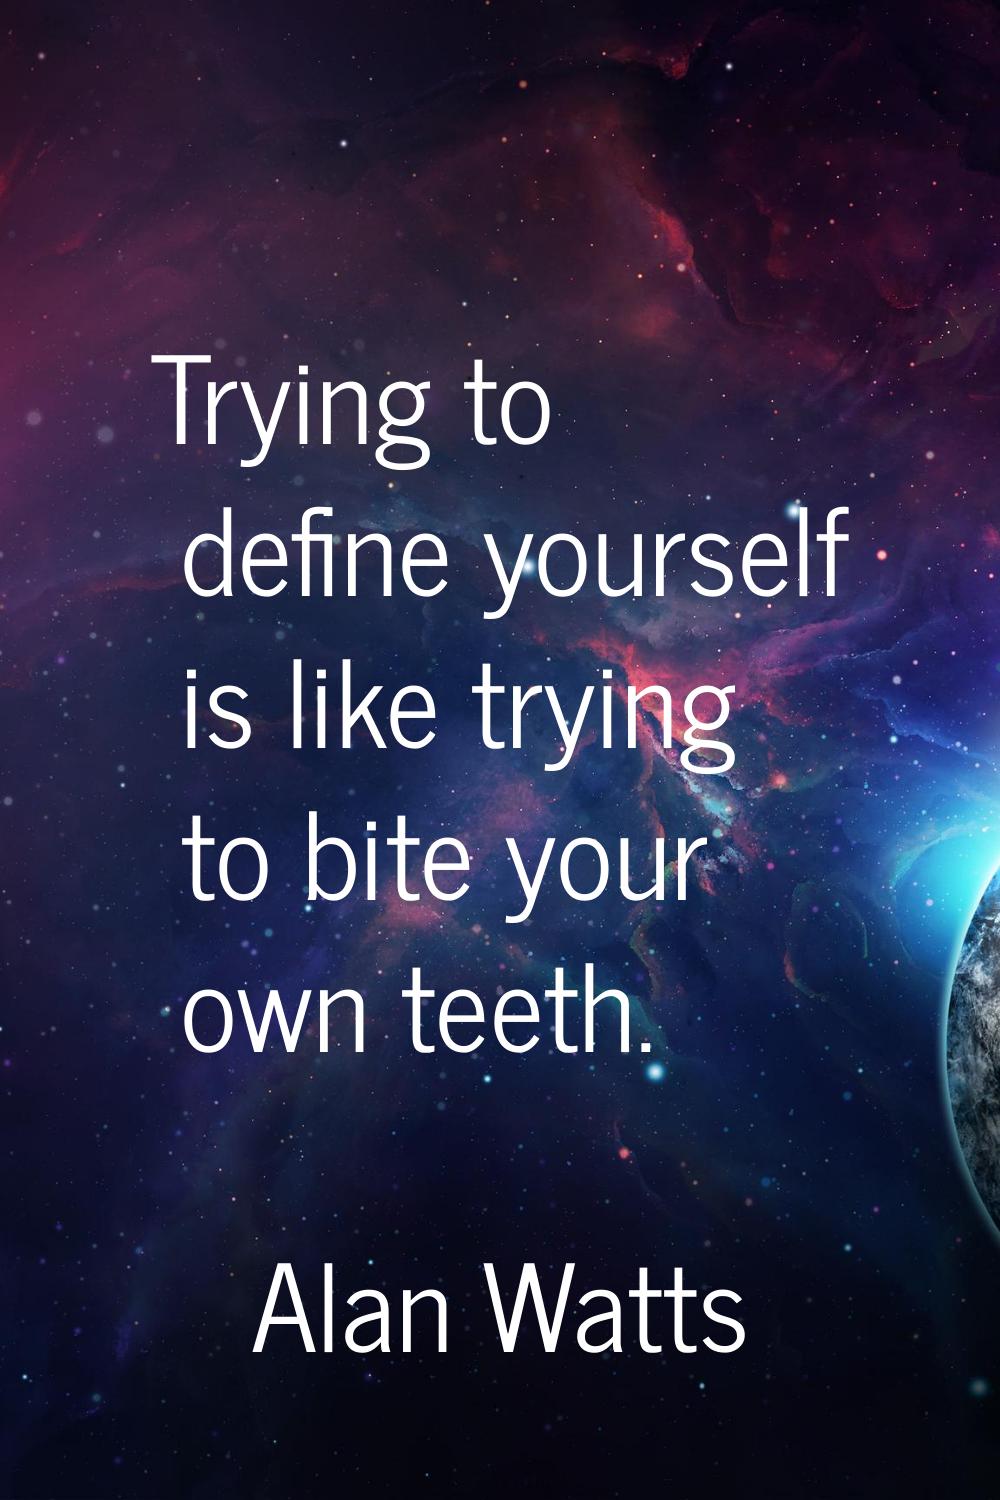 Trying to define yourself is like trying to bite your own teeth.